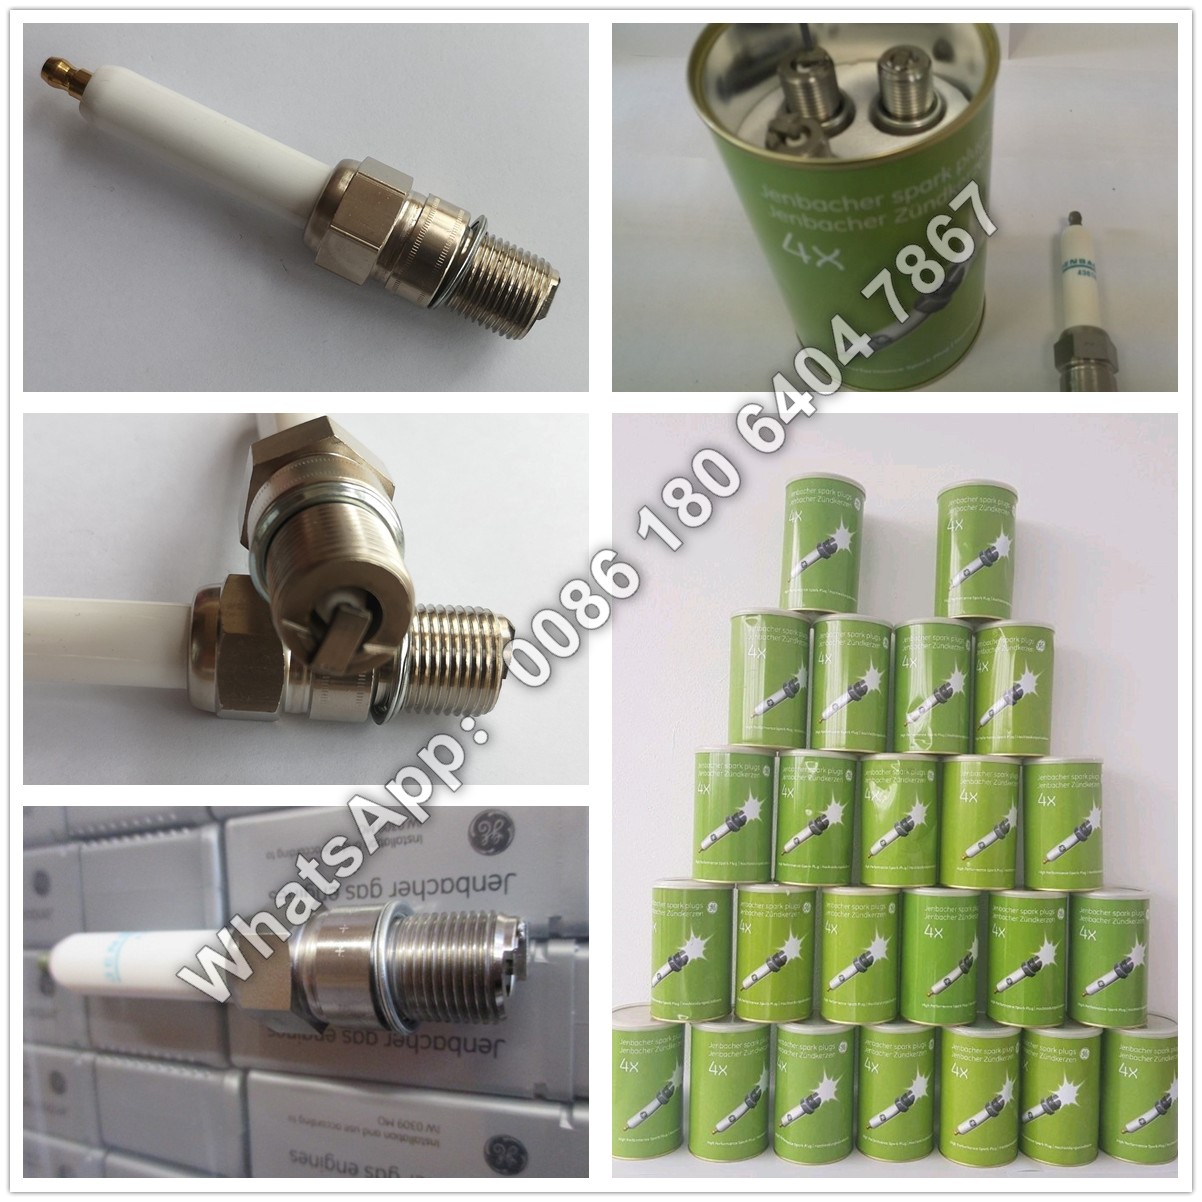 462203 industrial spark plugs are used in Jenbacher J320, J420 gas engines and gas generator sets